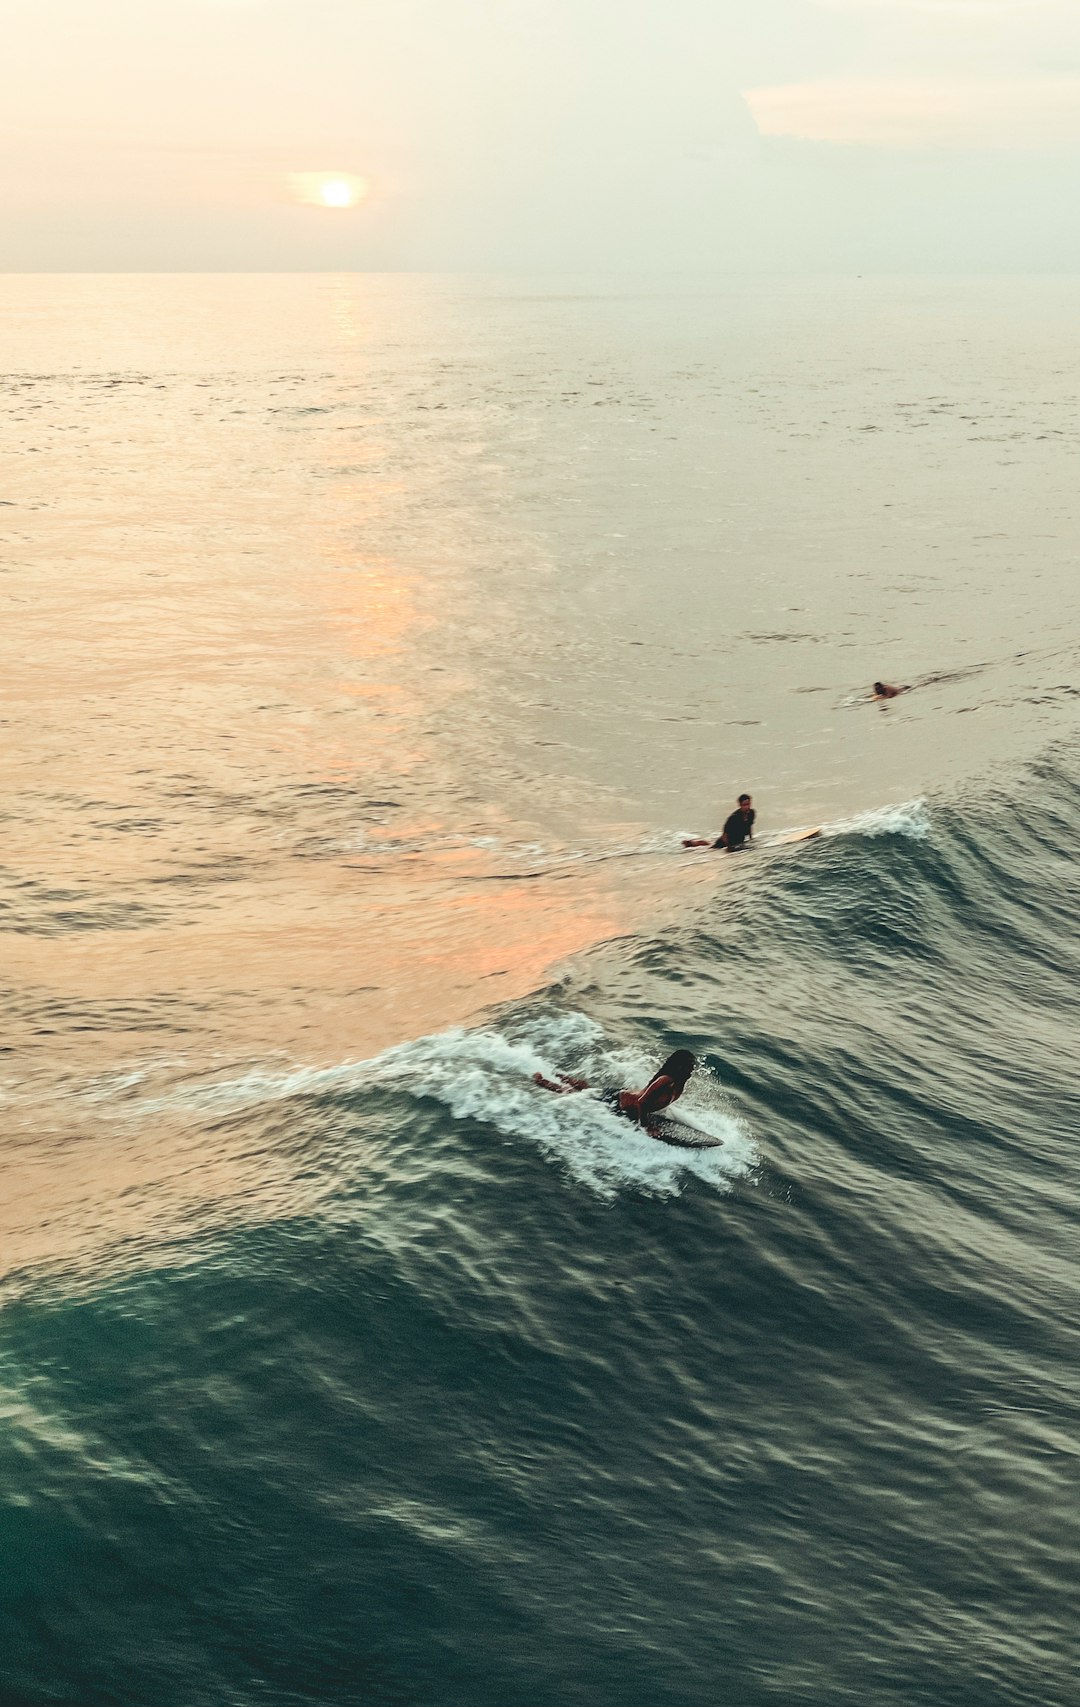 person surfing on body of water during golden hour